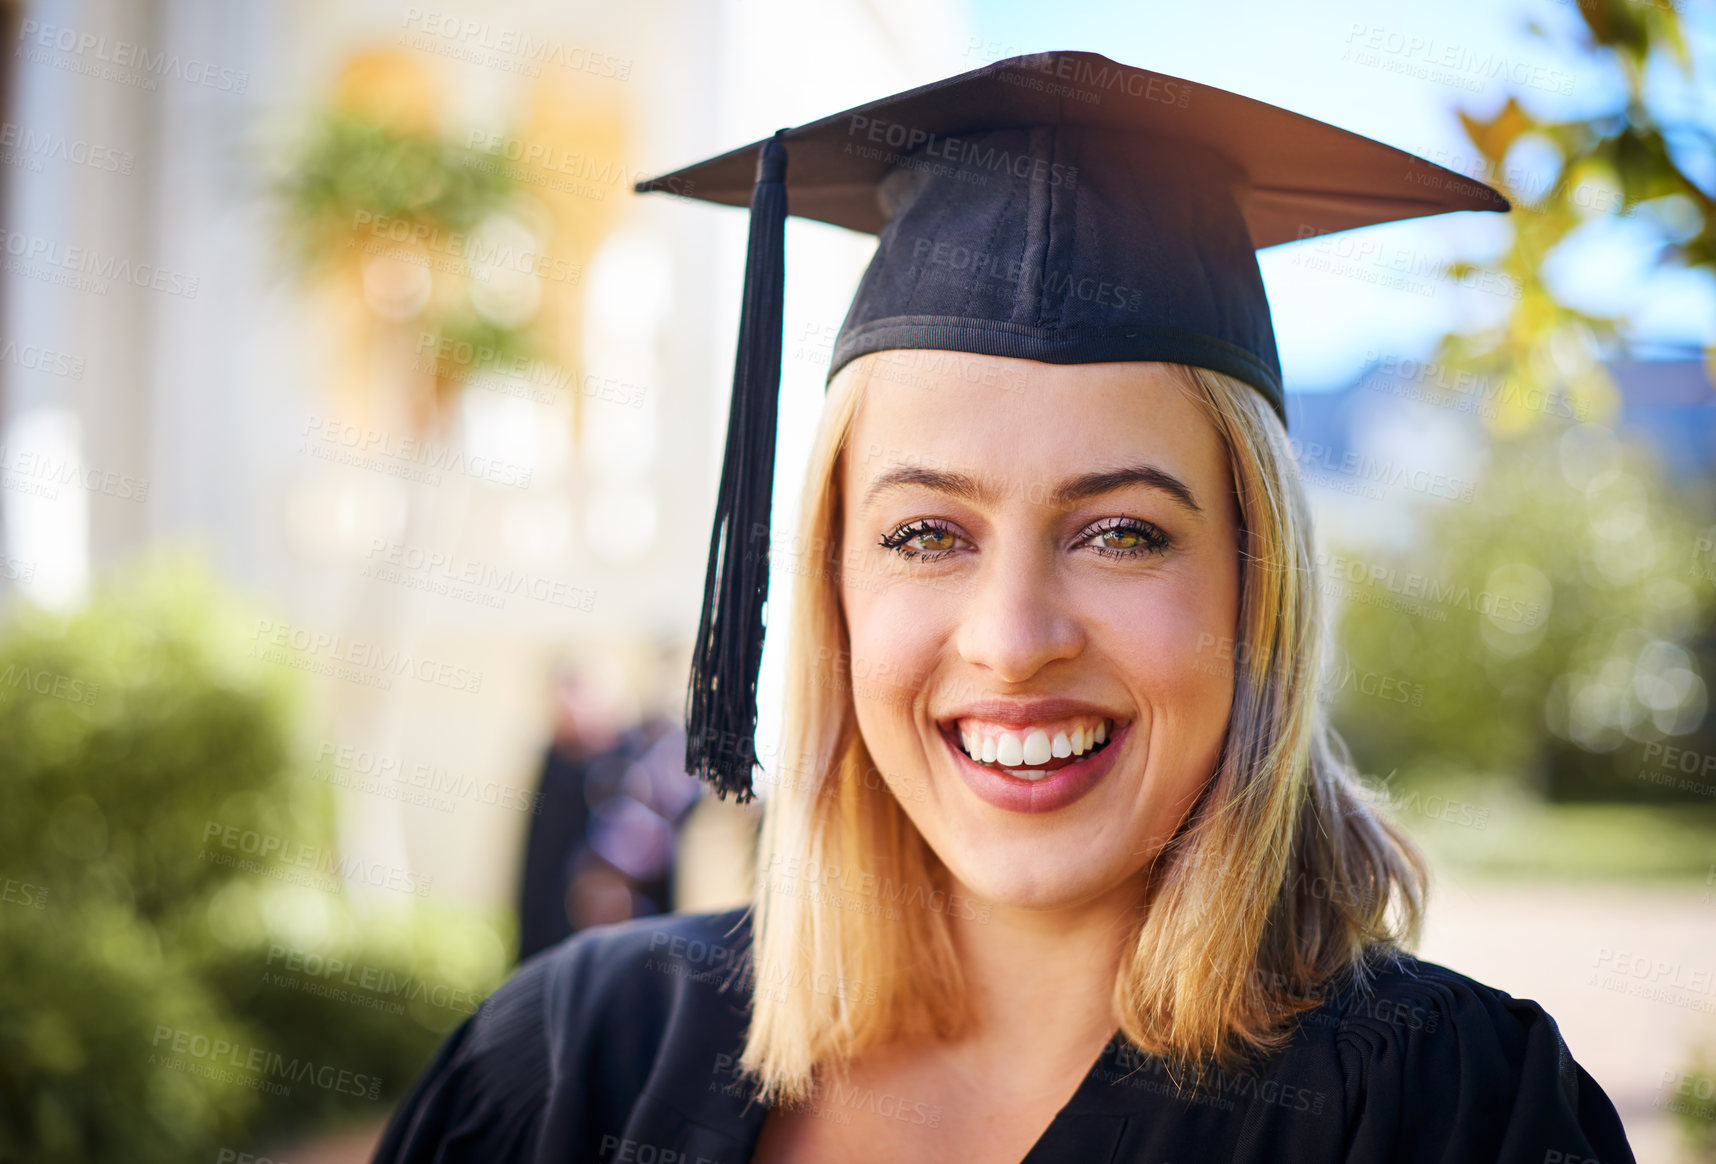 Buy stock photo Cropped shot of a happy young woman standing outside on graduation day